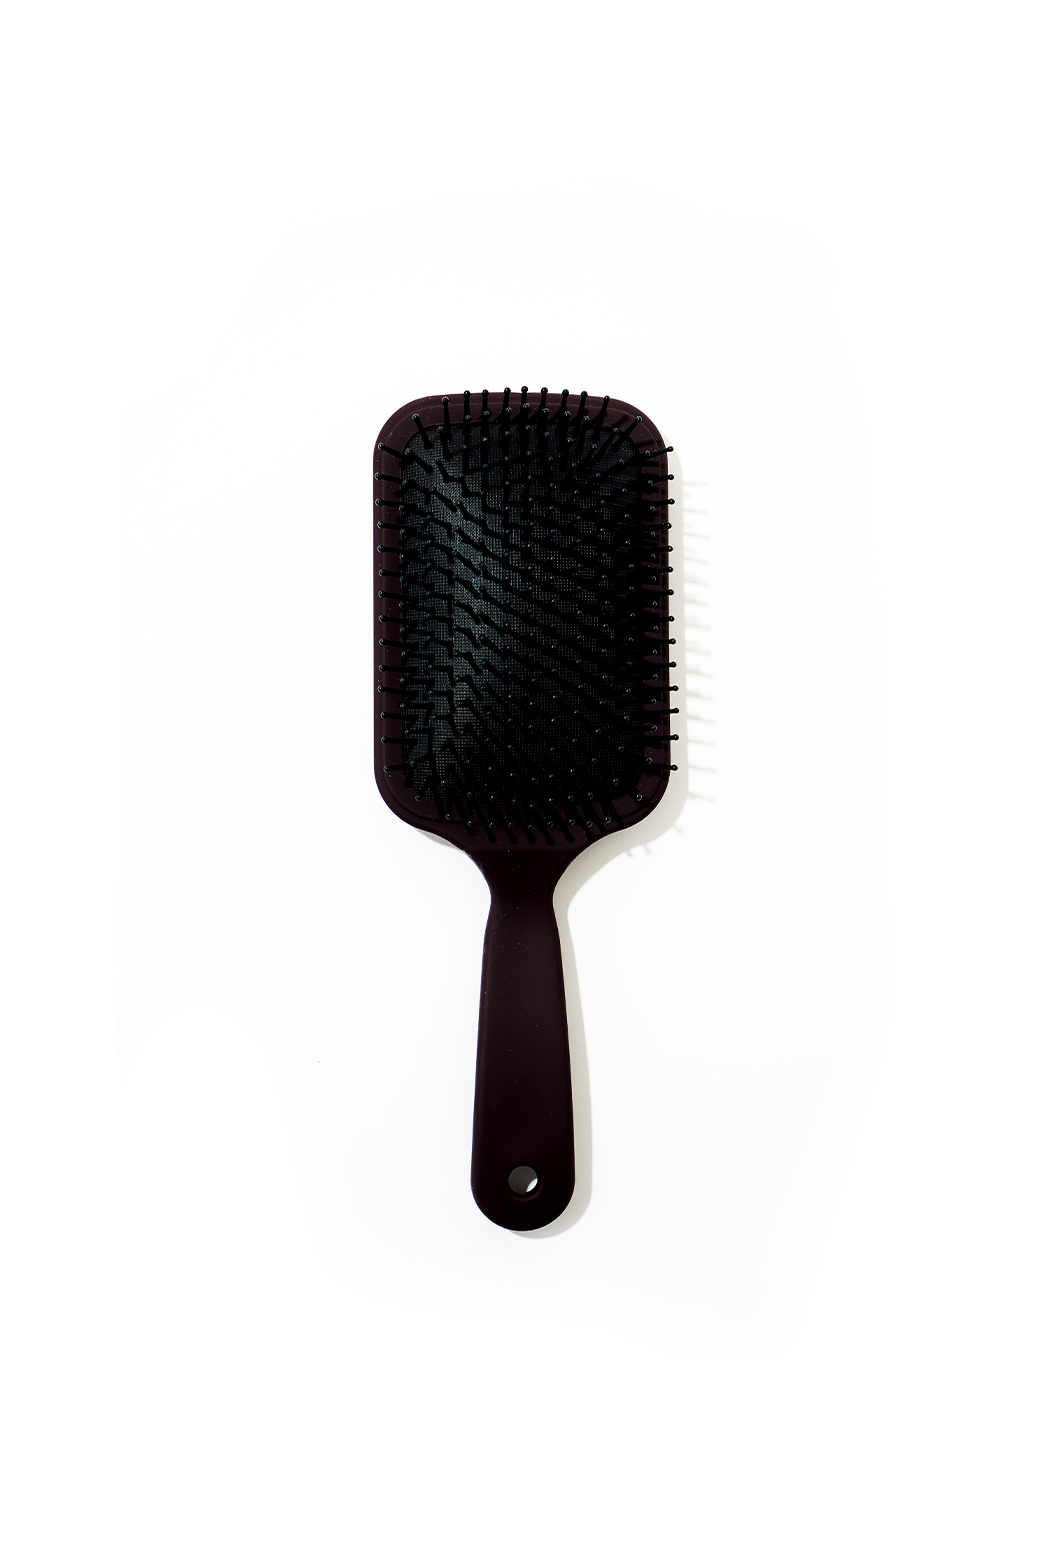 SILK-TOUCH Paddle Brush